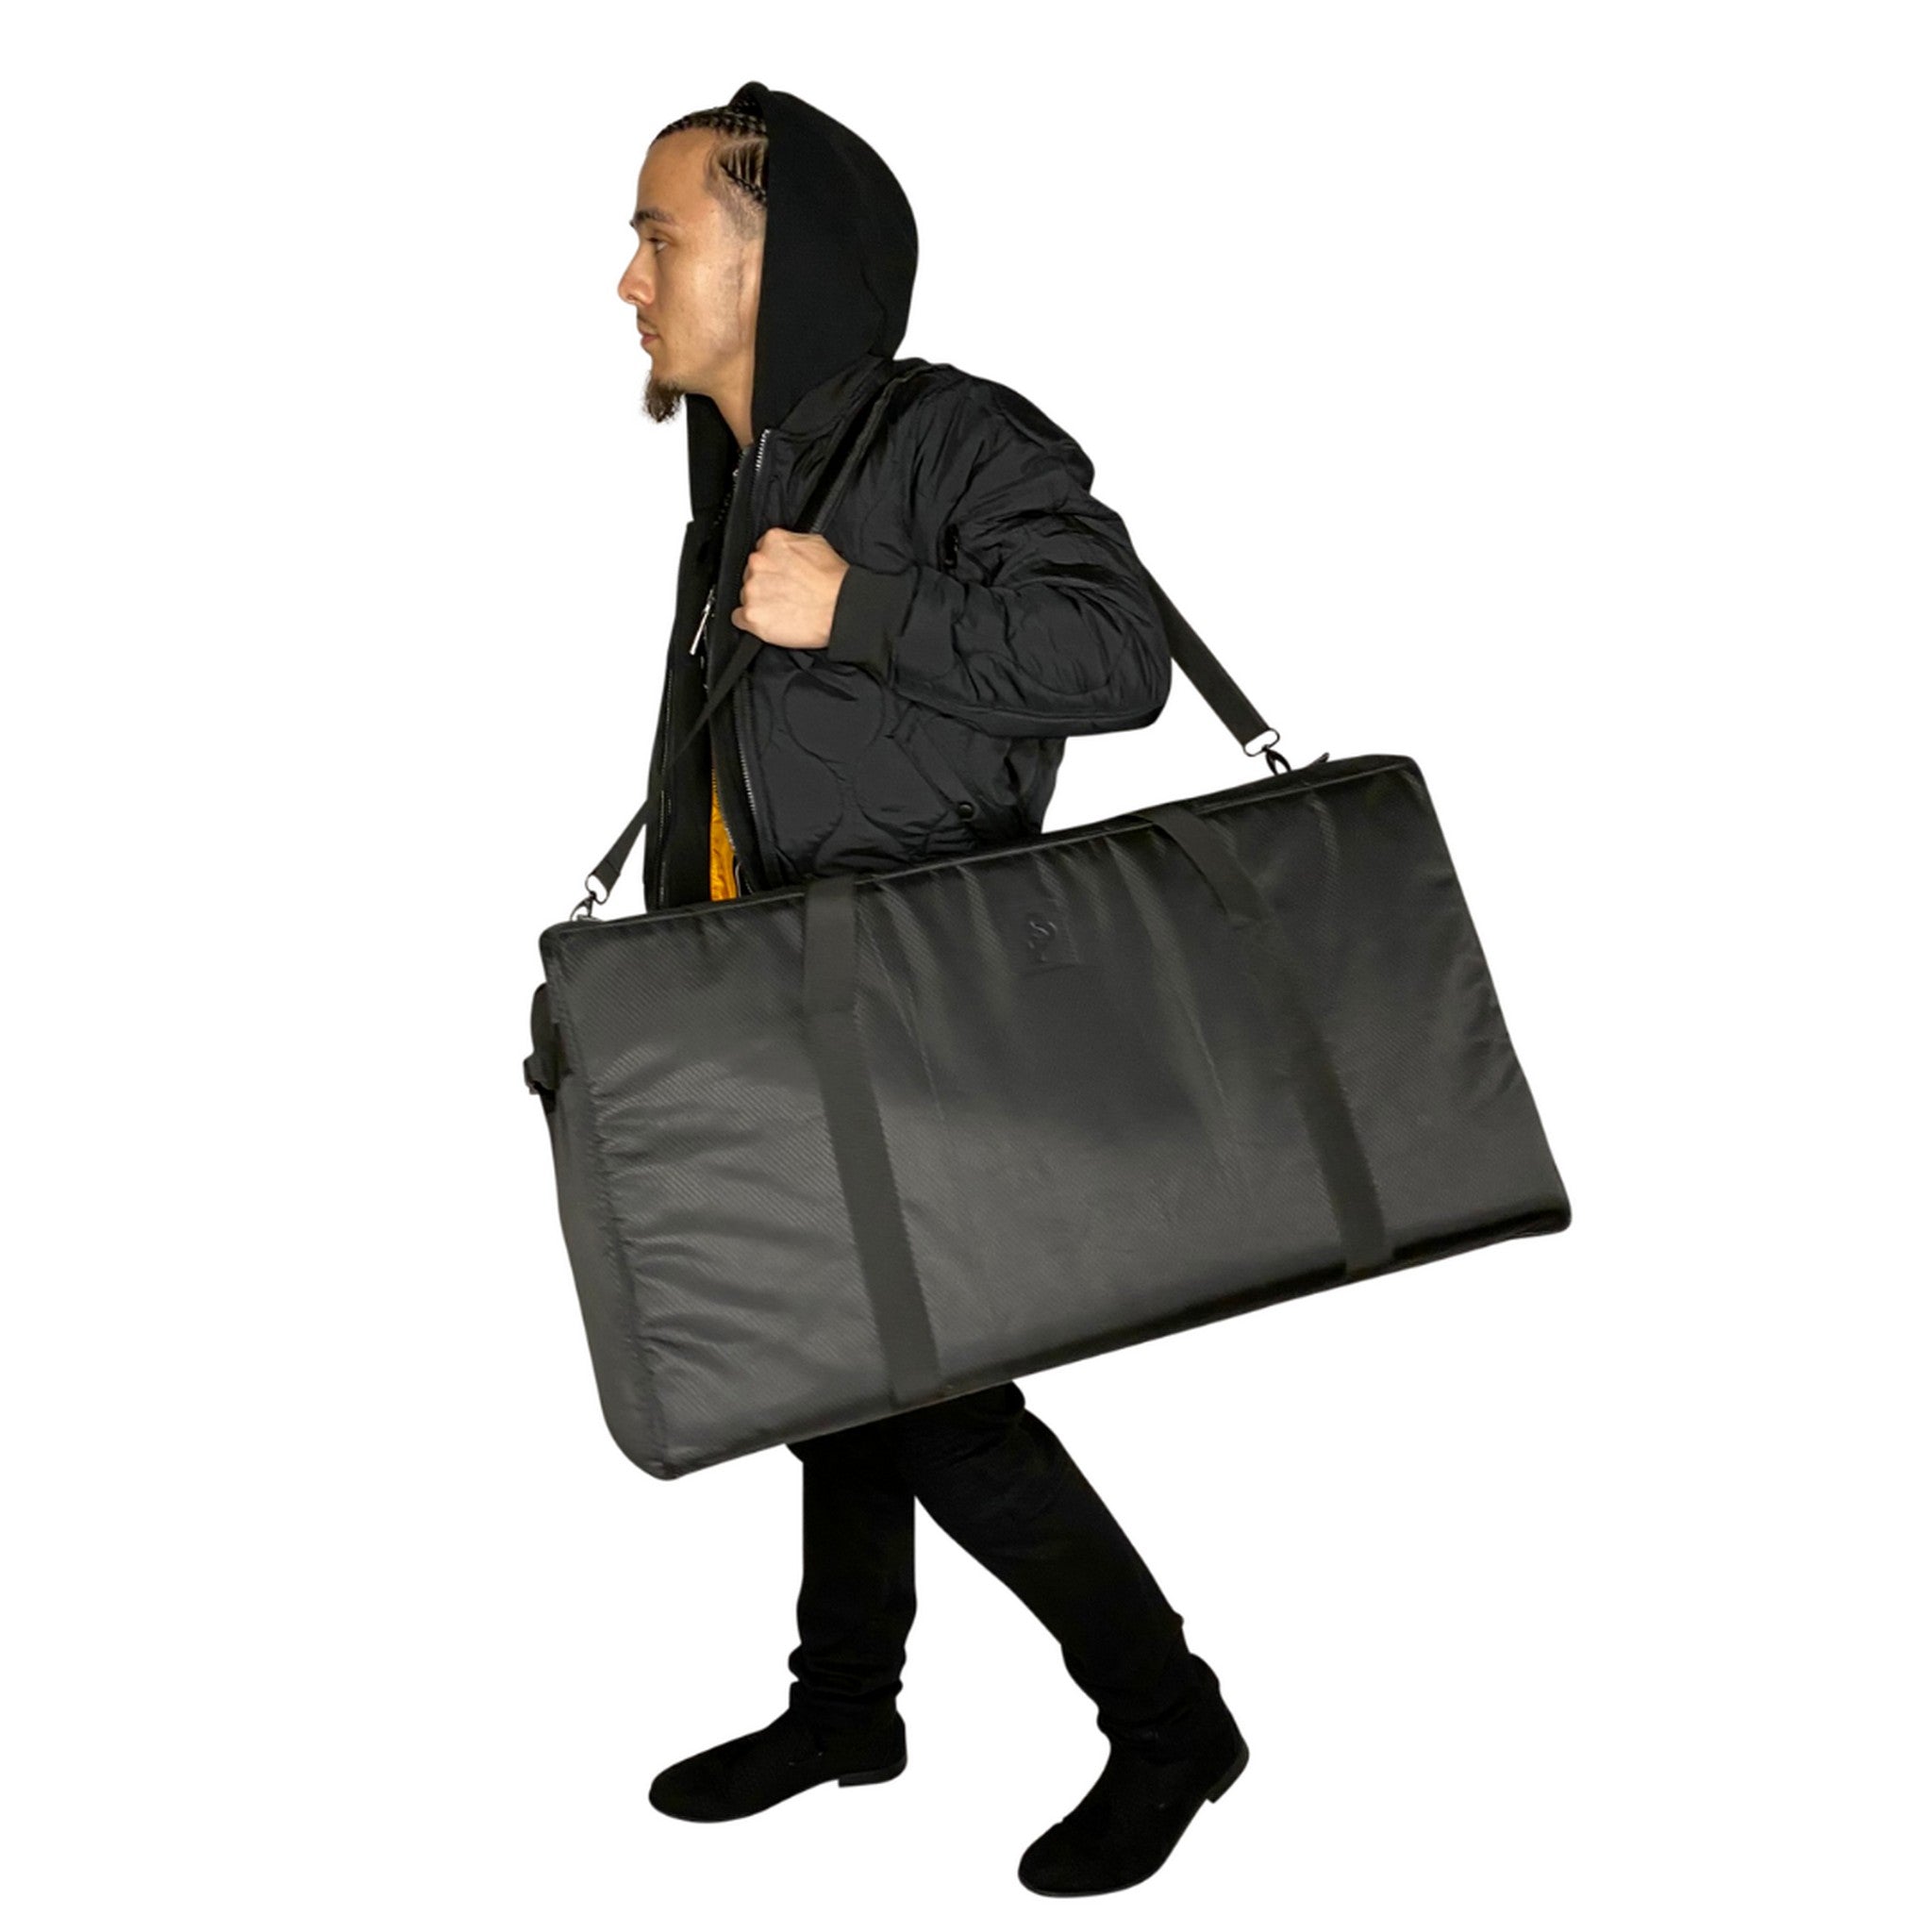 The Trap Duffle (XXL) in Black - Smell Proof Duffle Bag-Duffle Bag-Snoopproofbags